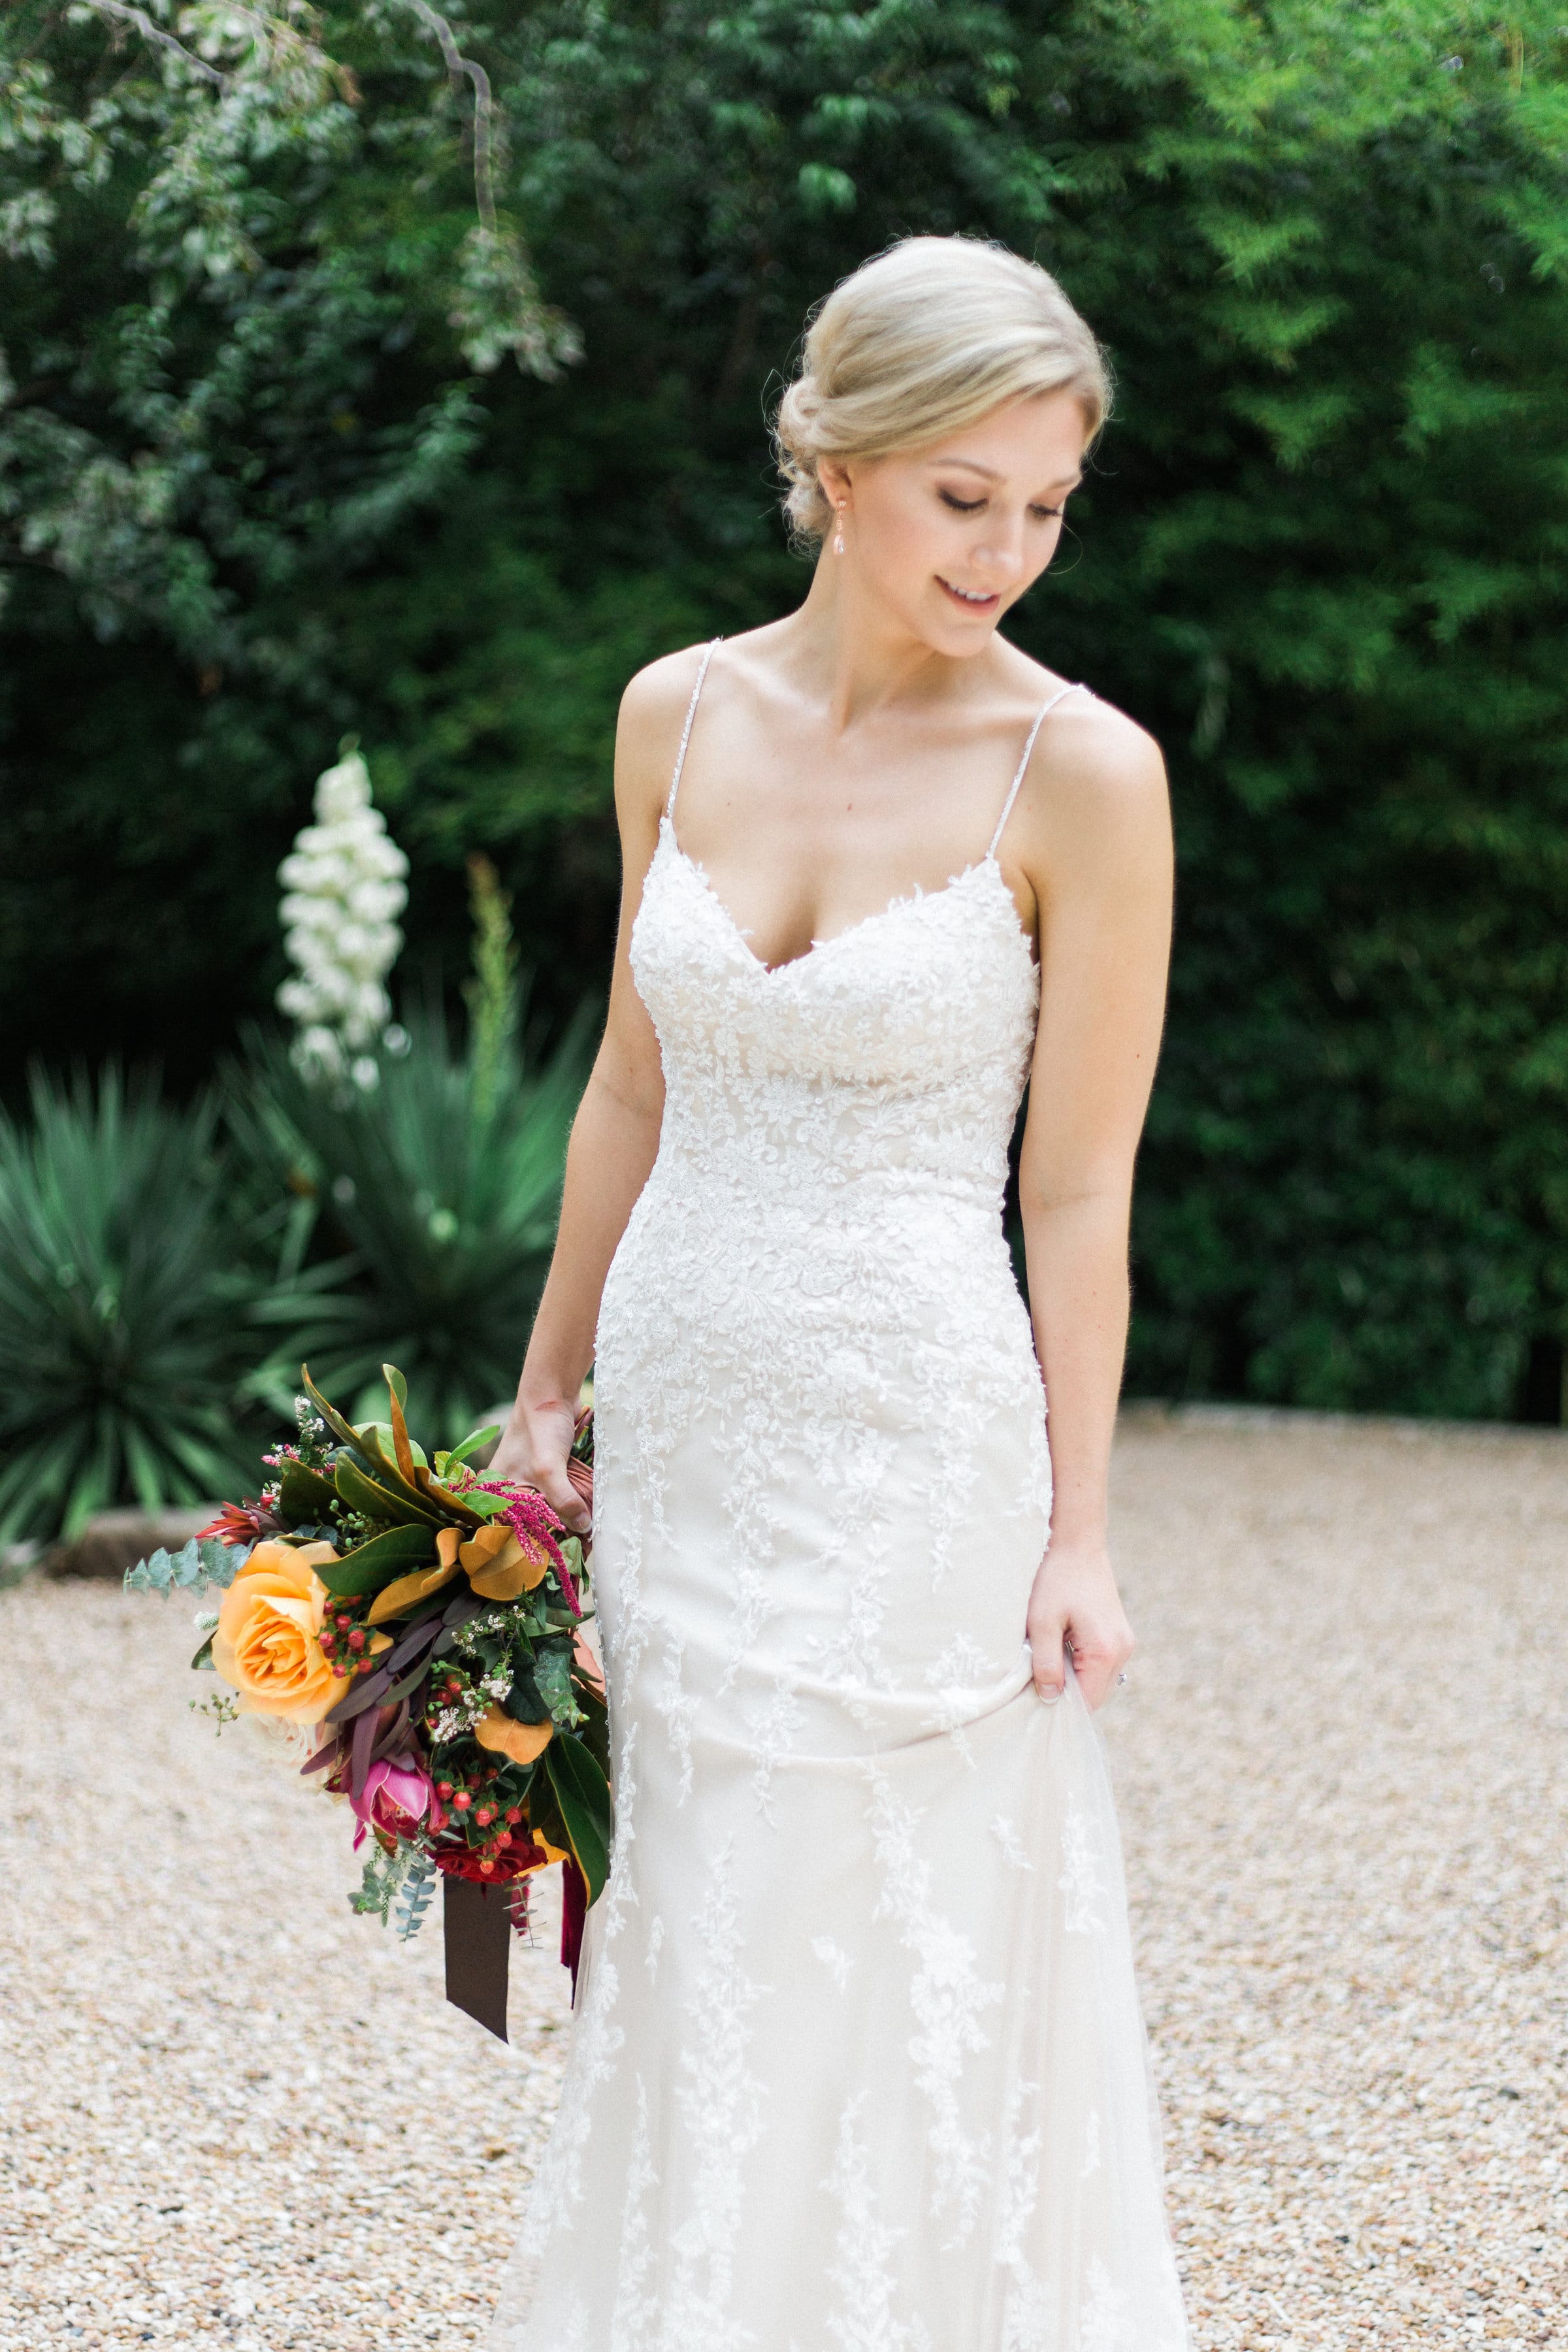 Gorgeous Outdoor Wedding Featuring Jewel Tones and Shimmery Lace Gown. Sarah wore the Nola wedding dress by Maggie Sottero.